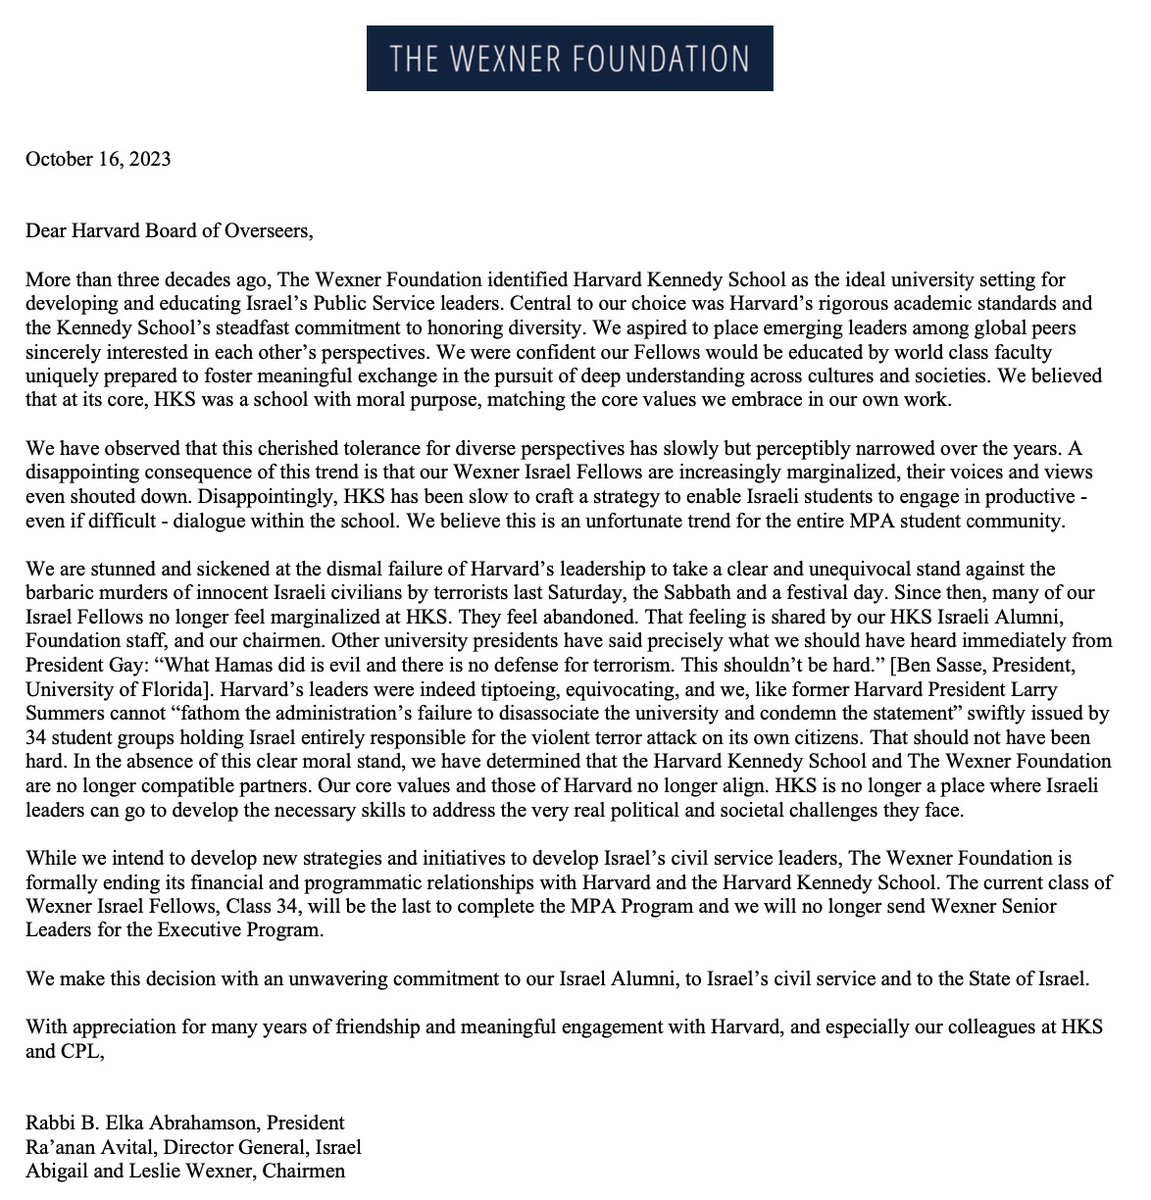 BIG NEWS: The Wexner Foundation announces that it is cutting ties with @Harvard over 'the dismal failure of Harvard’s leadership to take a clear and unequivocal stand against the barbaric murders of innocent Israeli civilians by terrorists last Saturday.'